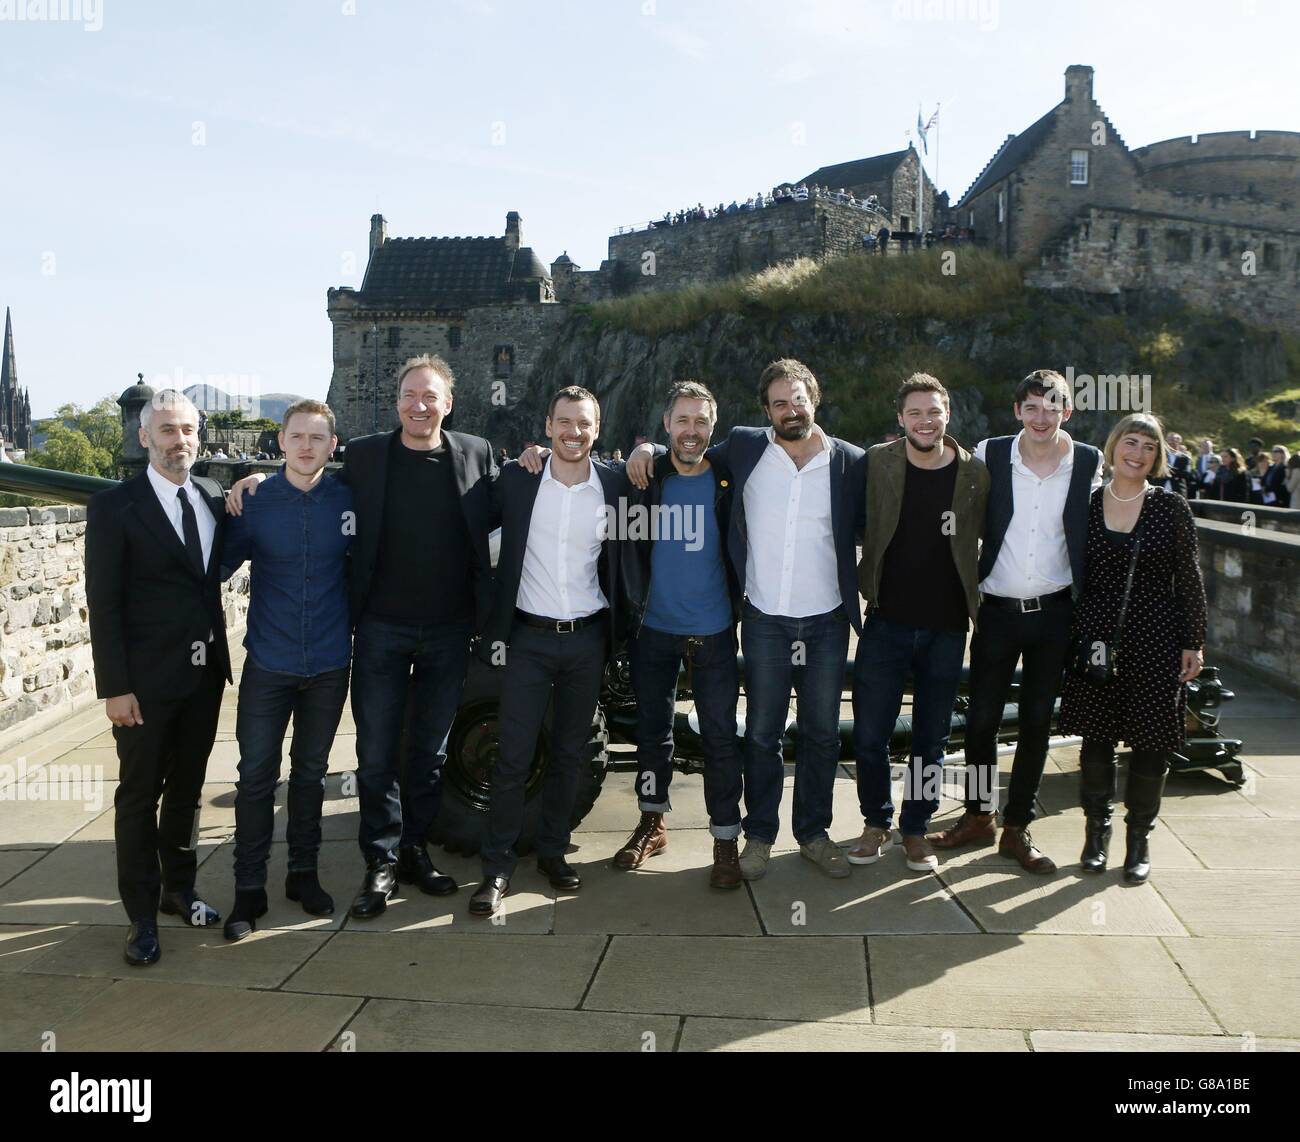 Macbeth stars (left to right) Iain Canning, Ross Anderson, David Thewlis, Michael Fassbender, Paddy Considine, Director Justin Kurzel, Jack Reynor, James Harknes and Laura Smith during a photocall at Edinburgh Castle in Scotland. Stock Photo